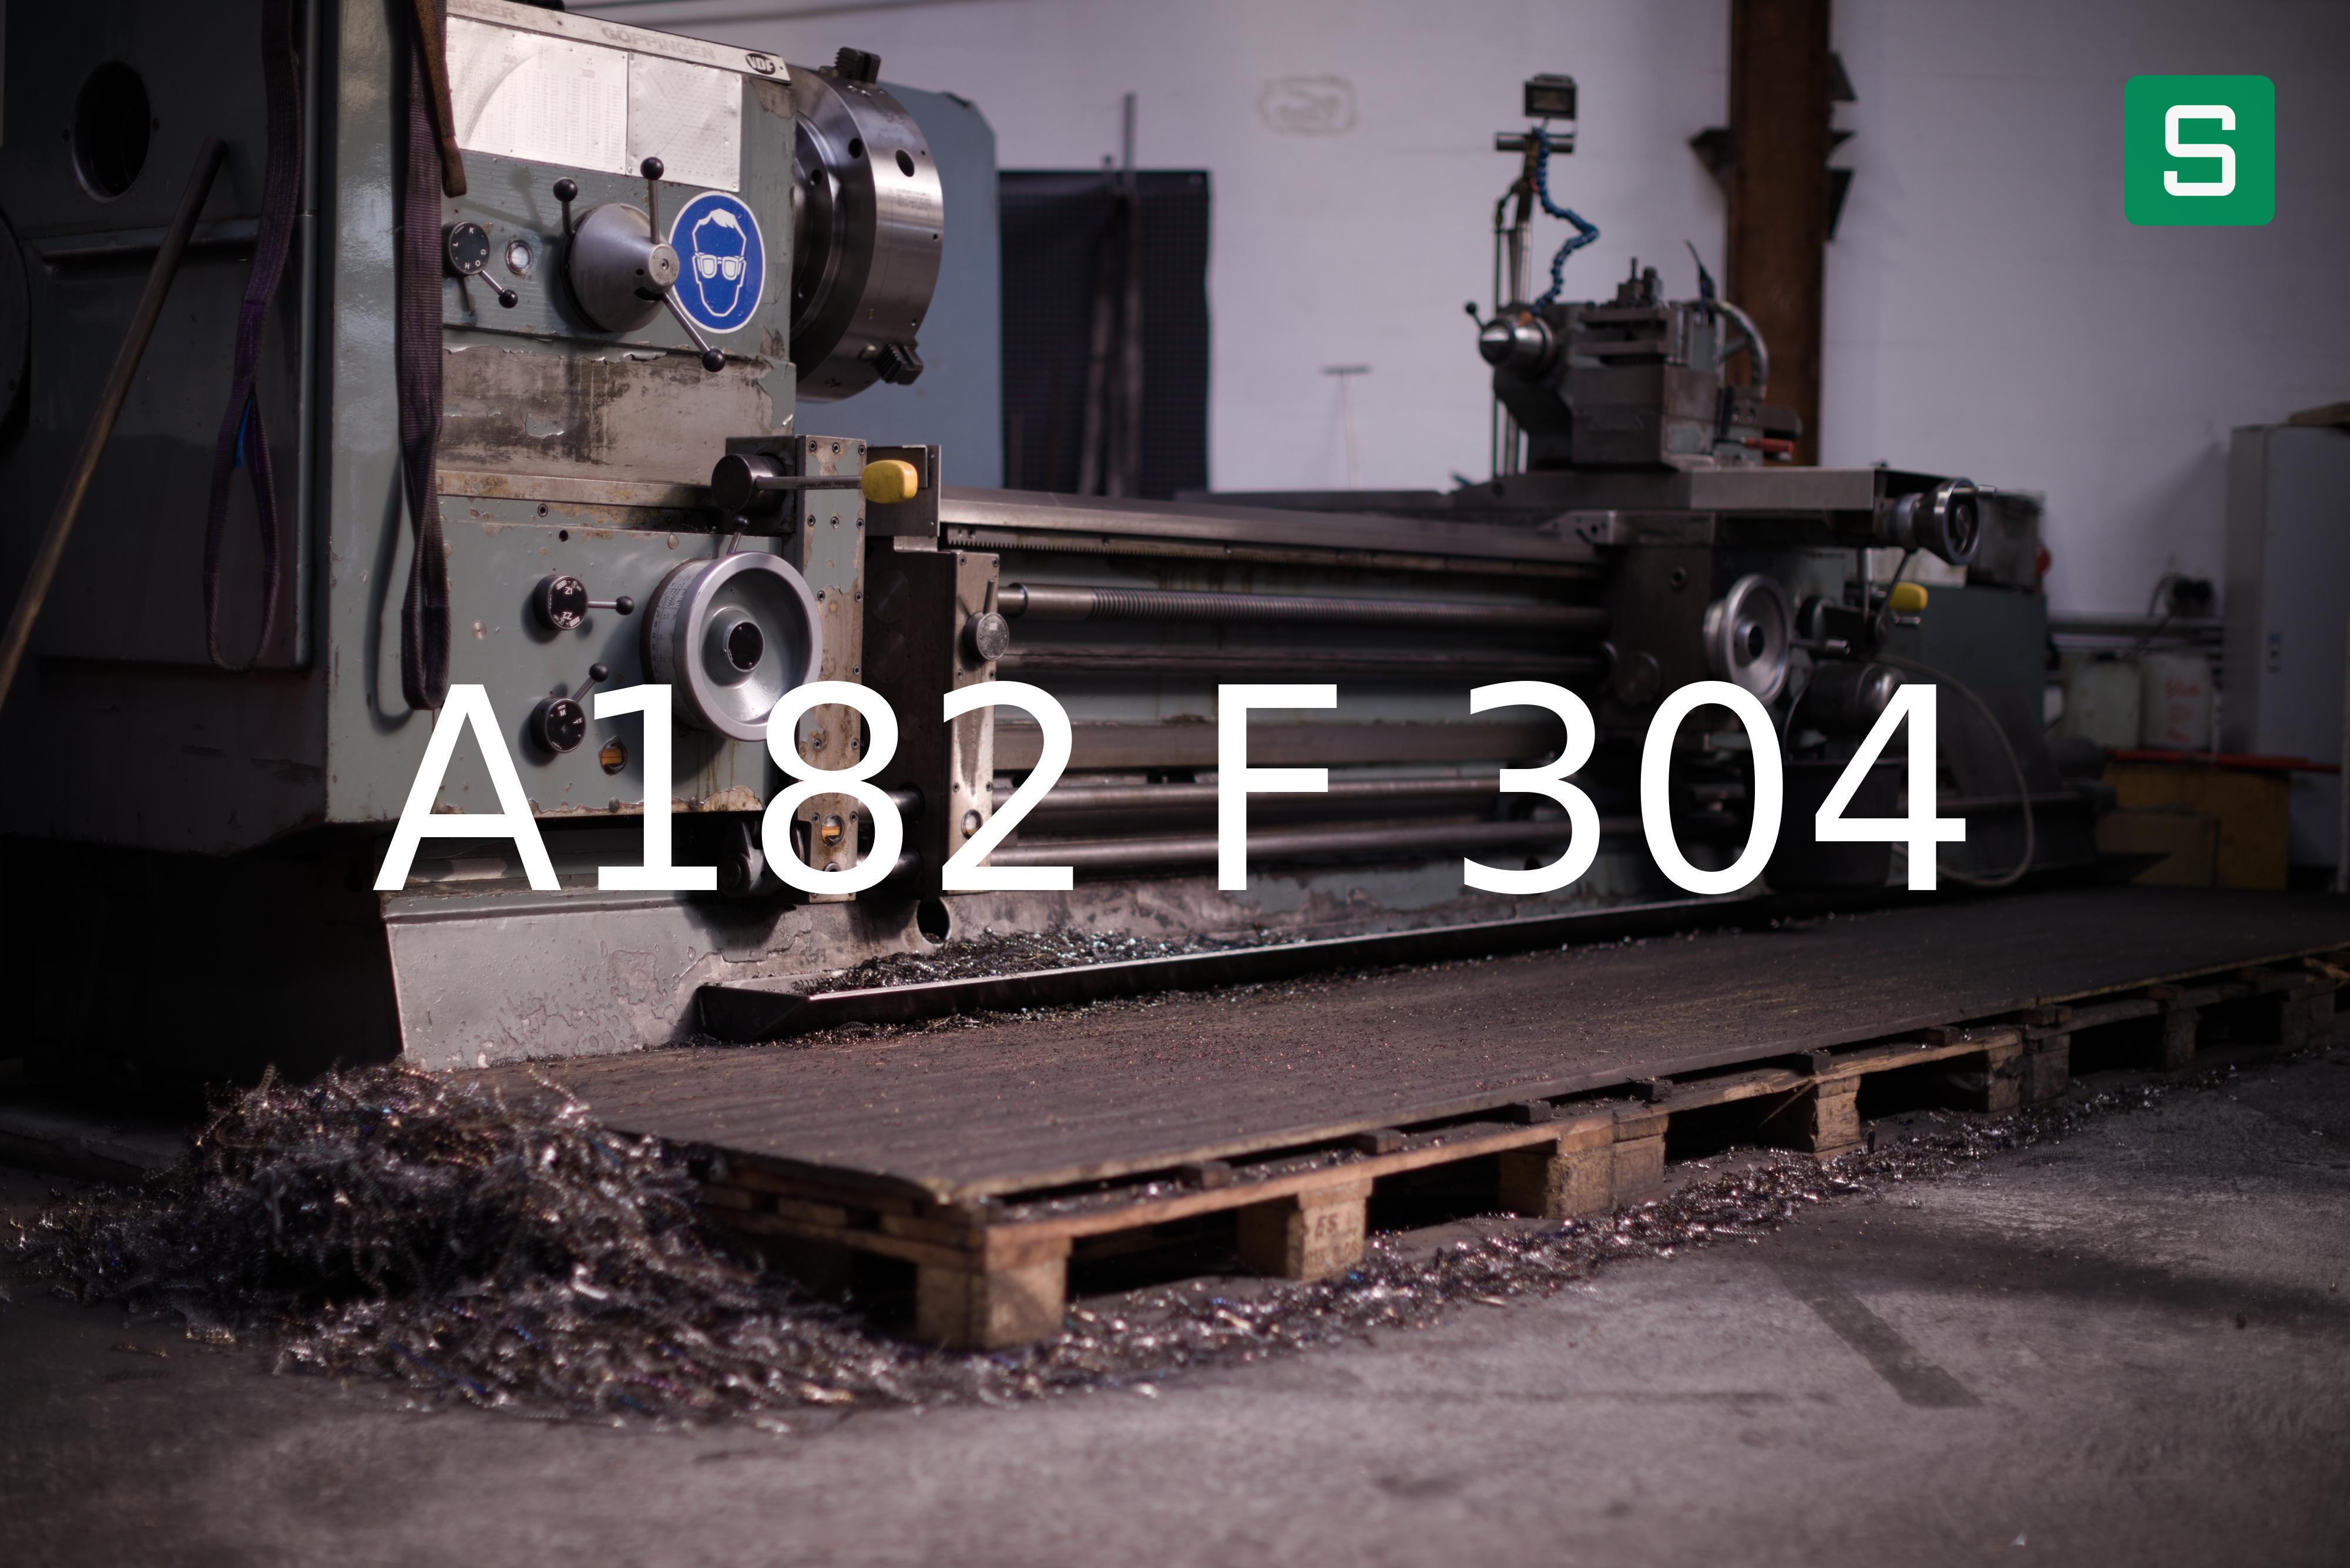 Steel Material: A182 F 304